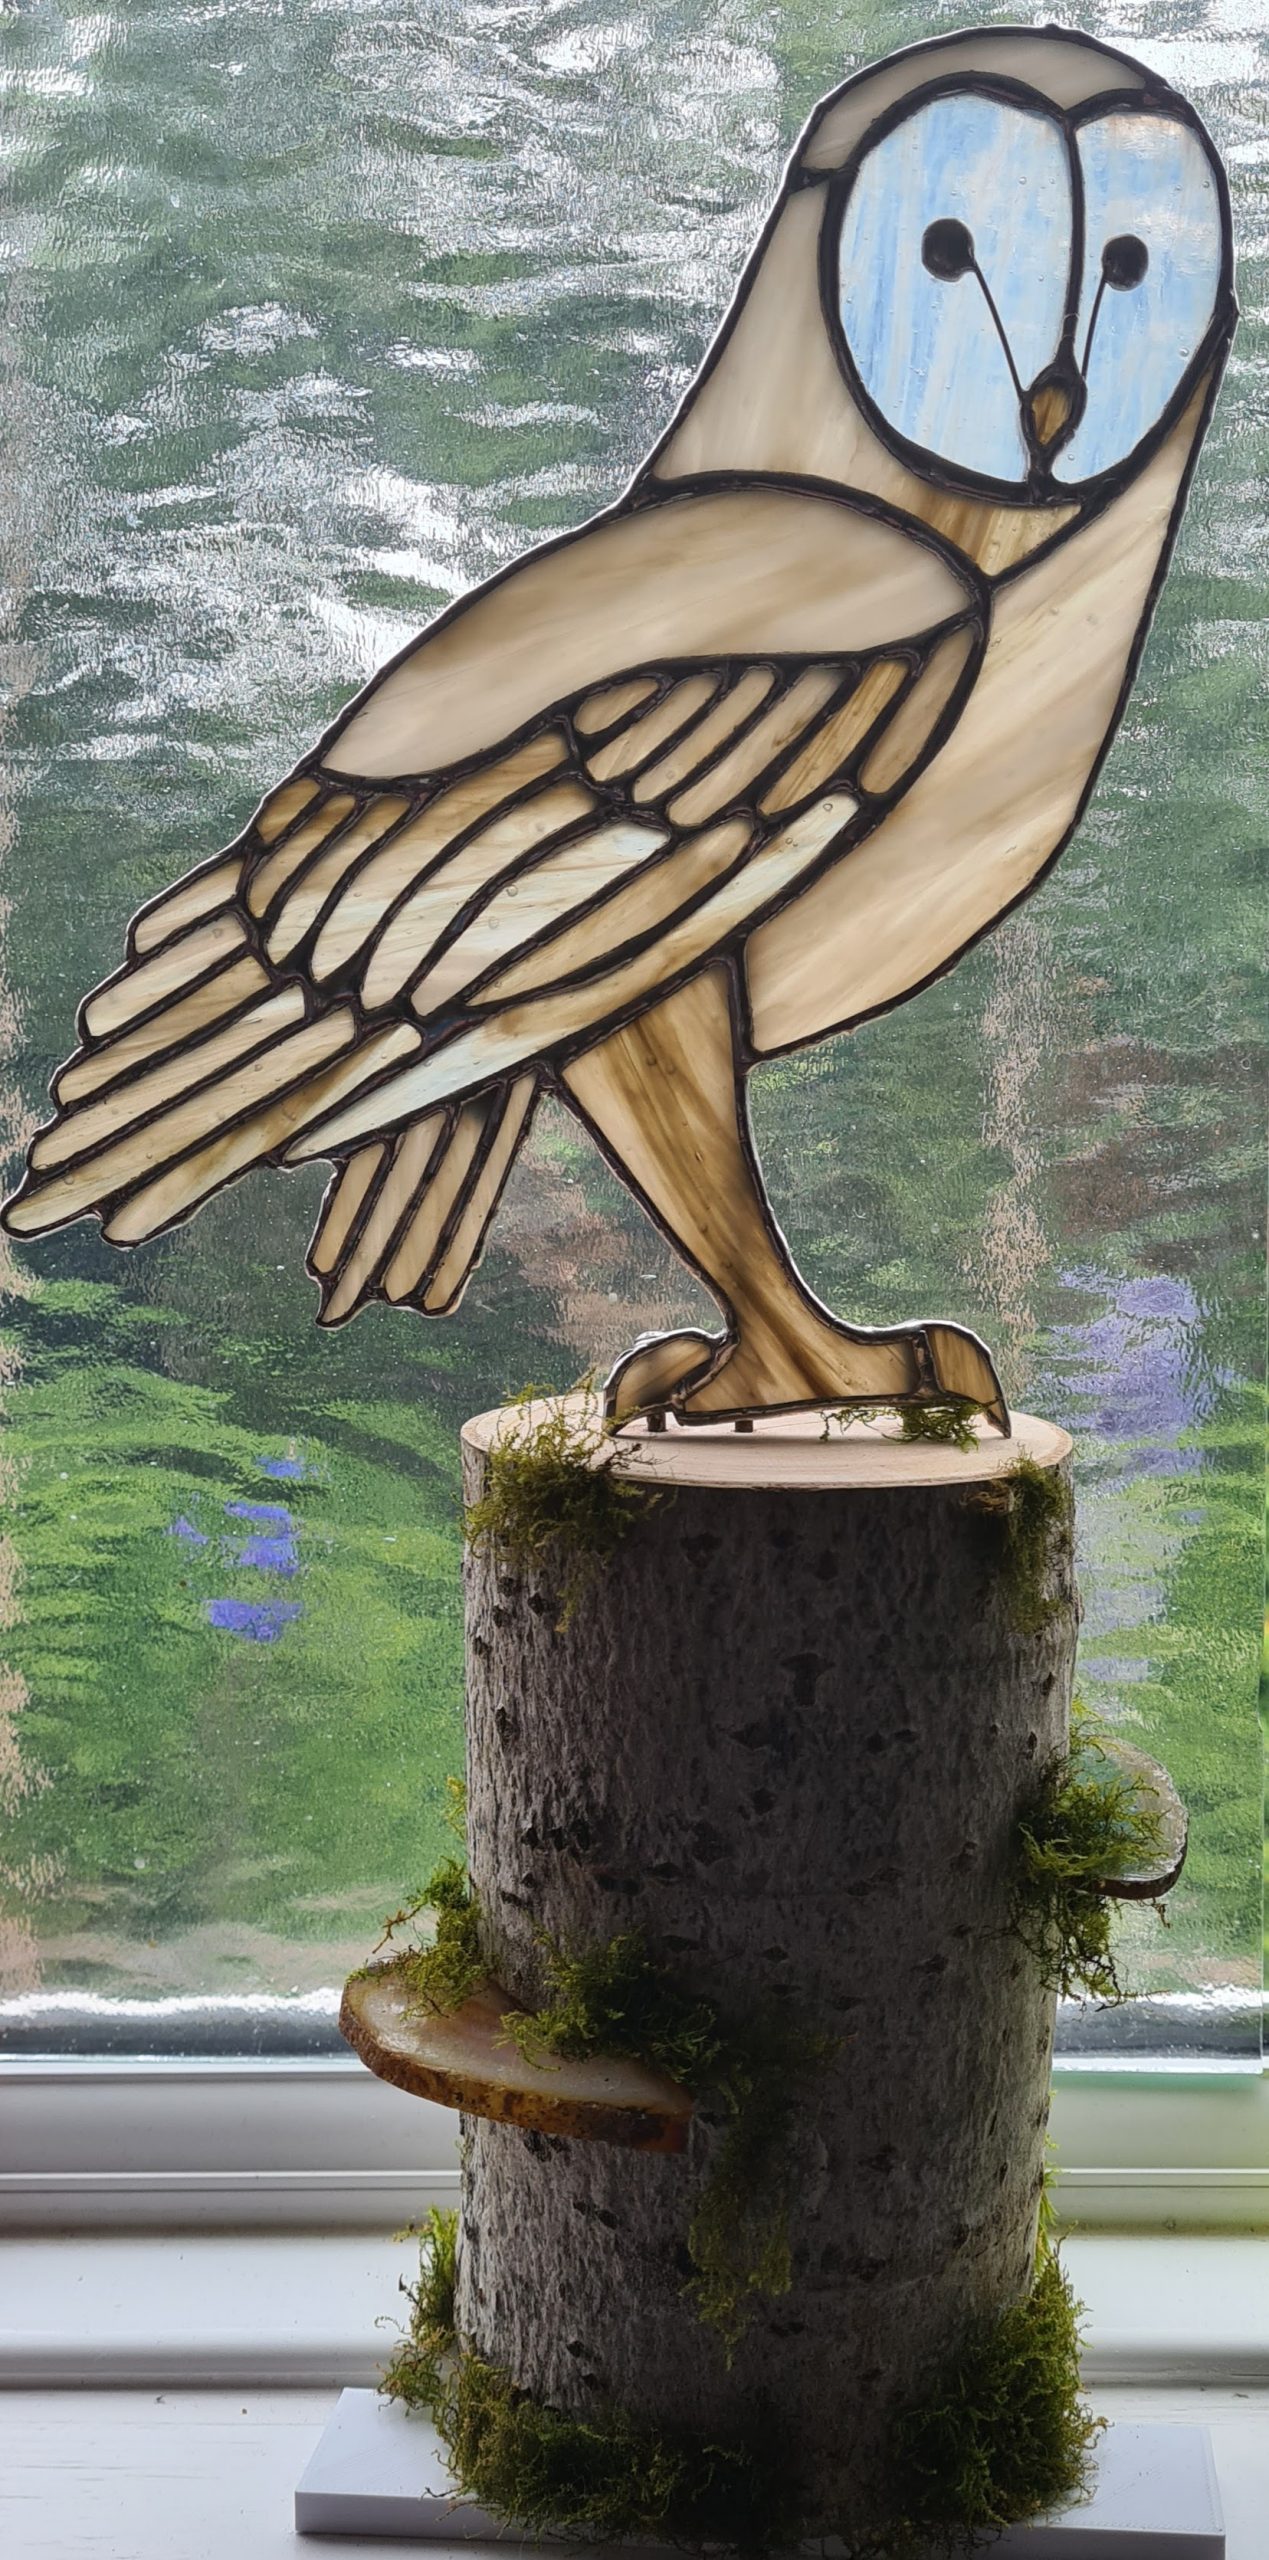 Stained glass barn owl on a tree stump, with agate slices to represent fungi